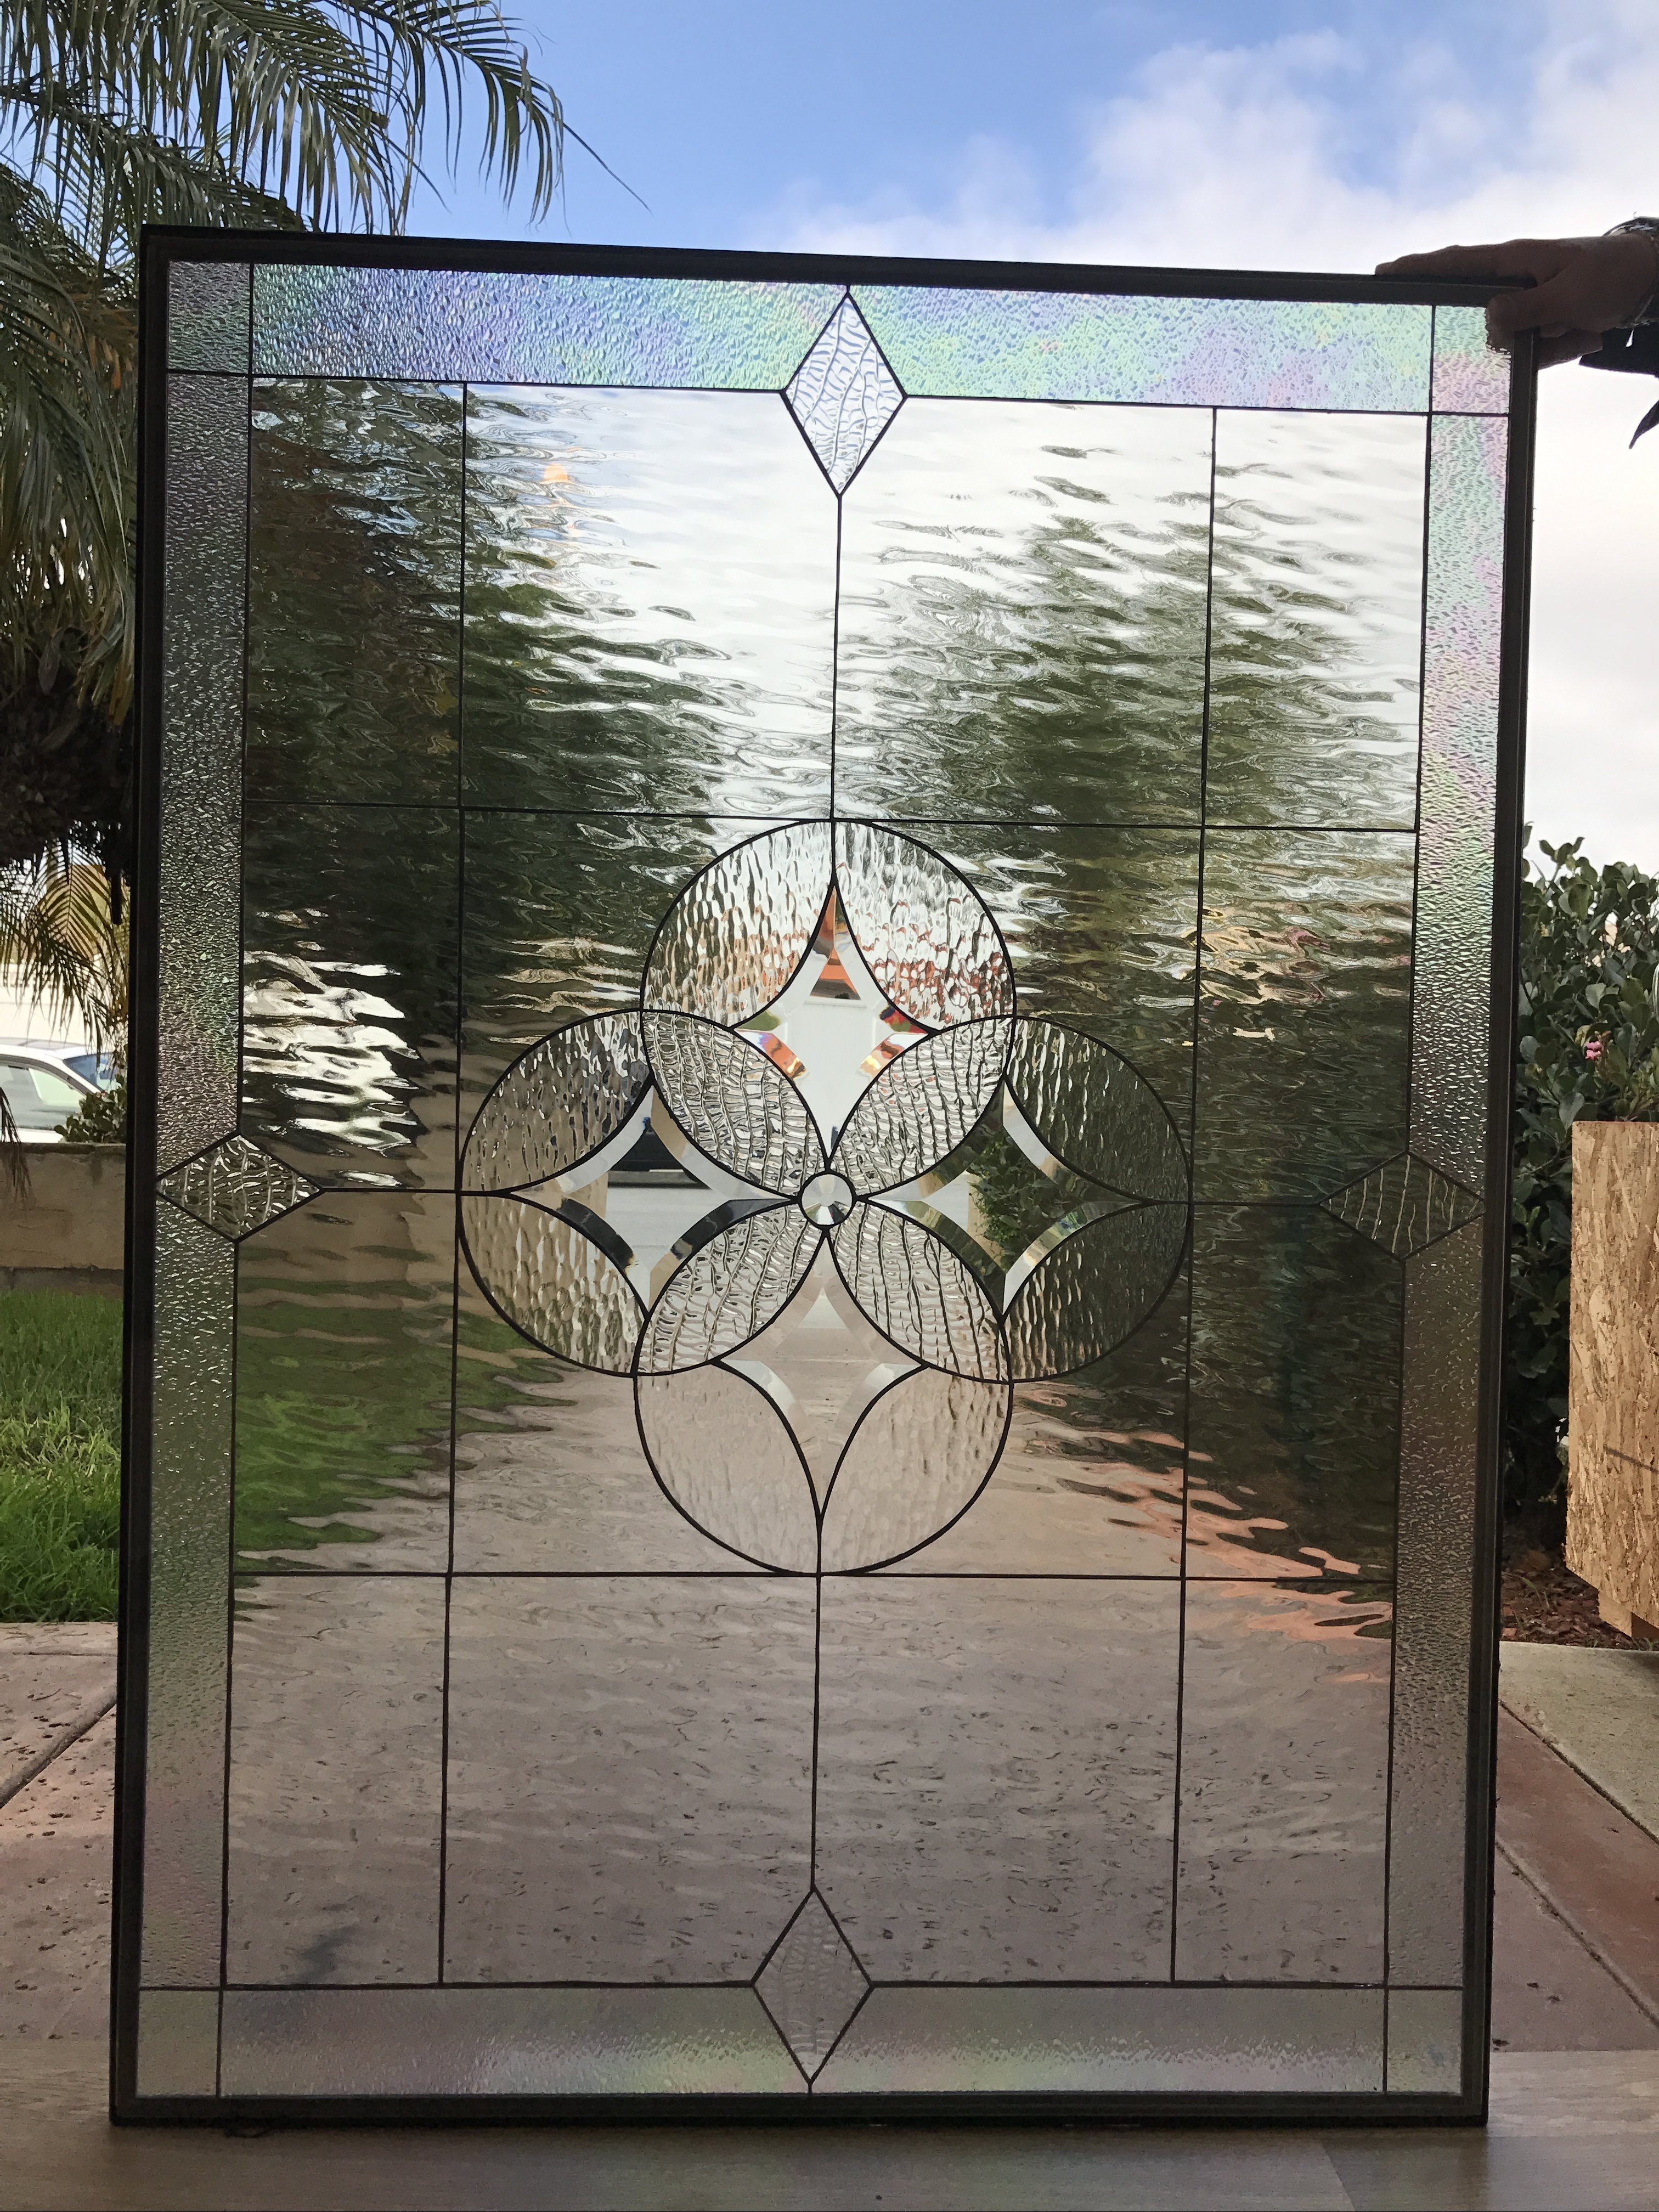 The Elegant Hermosa Leaded Stained And Beveled Glass Window Panel